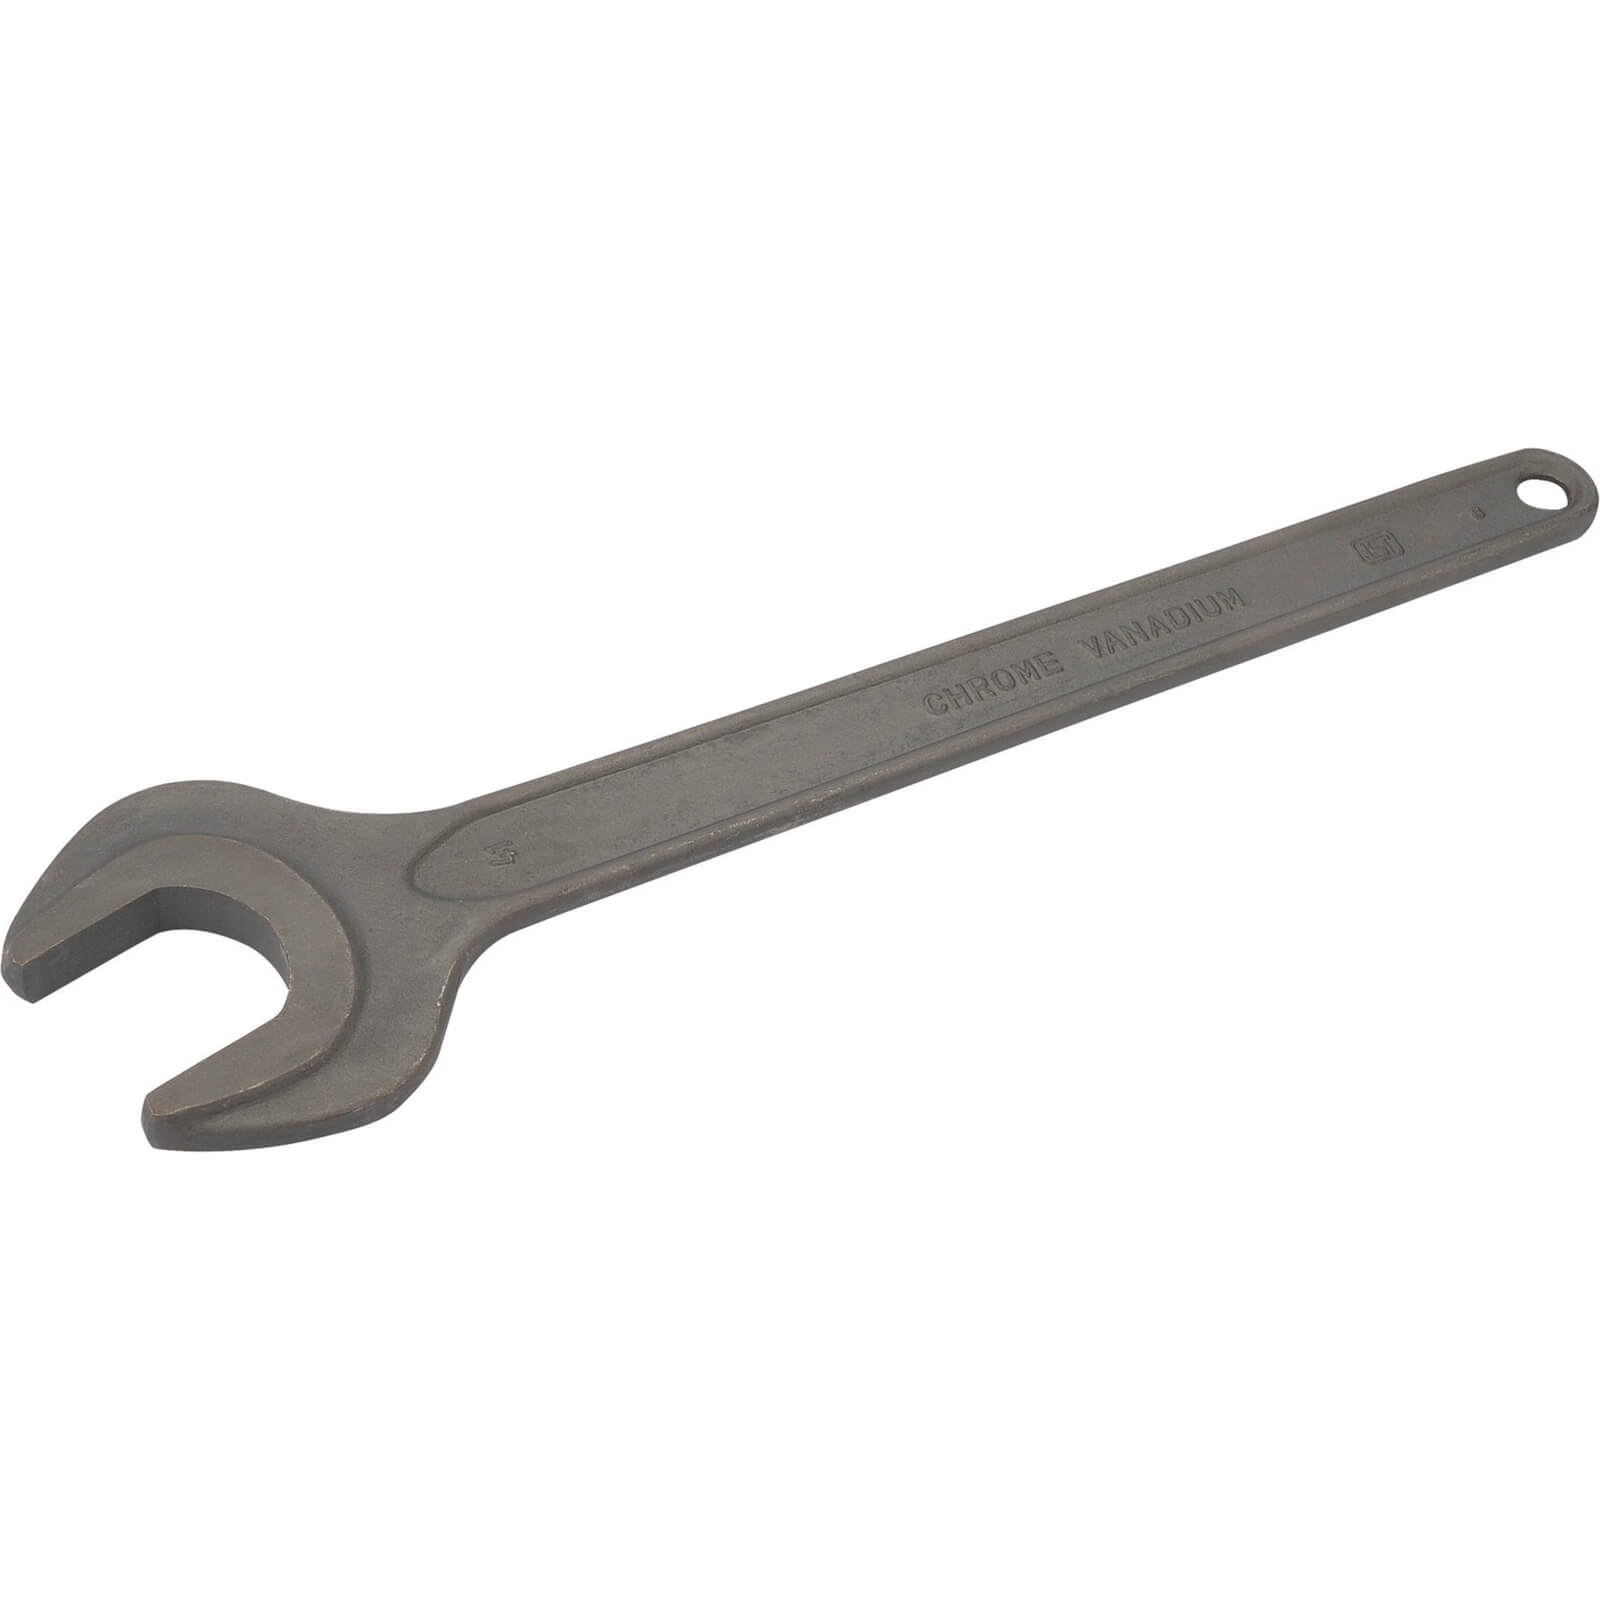 Photos - Wrench Draper Single Open Ended Spanner Metric 41mm 5894 